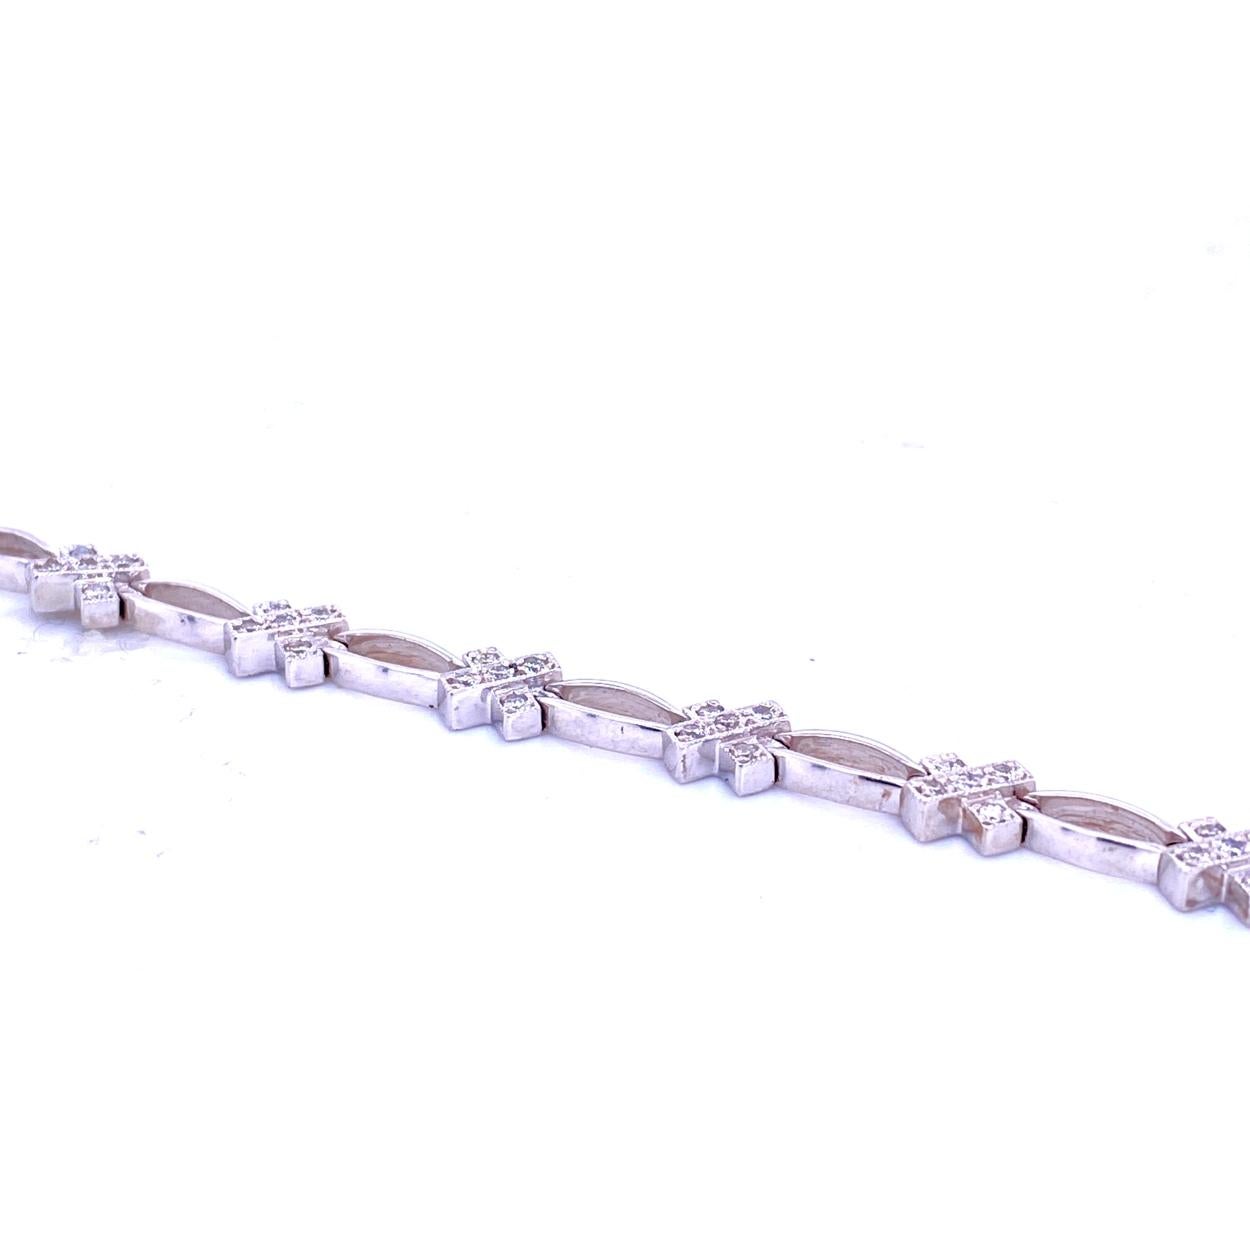 This Diamond Bracelet consists of 14 Links Pave Set with 70 1.2 mm Round Brilliant diamonds. The bracelet is made in 14K Gold .  The bracelet comes with a built in lock for safety.
Metal: 14K White Gold
Total Weight of diamonds: 0.63 Ct 
Total